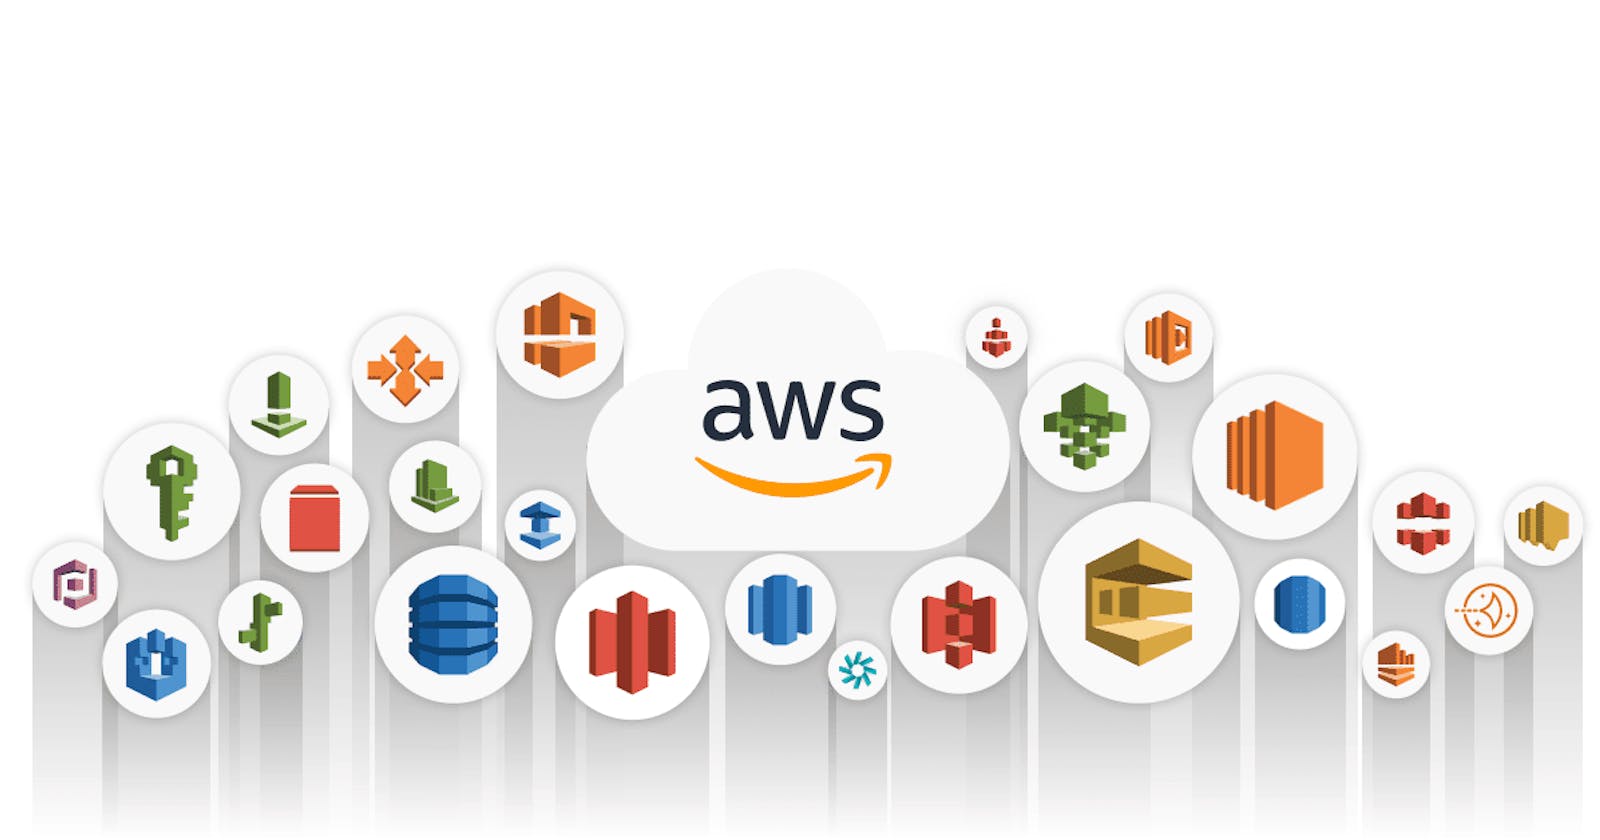 How to use AWS for small scale business